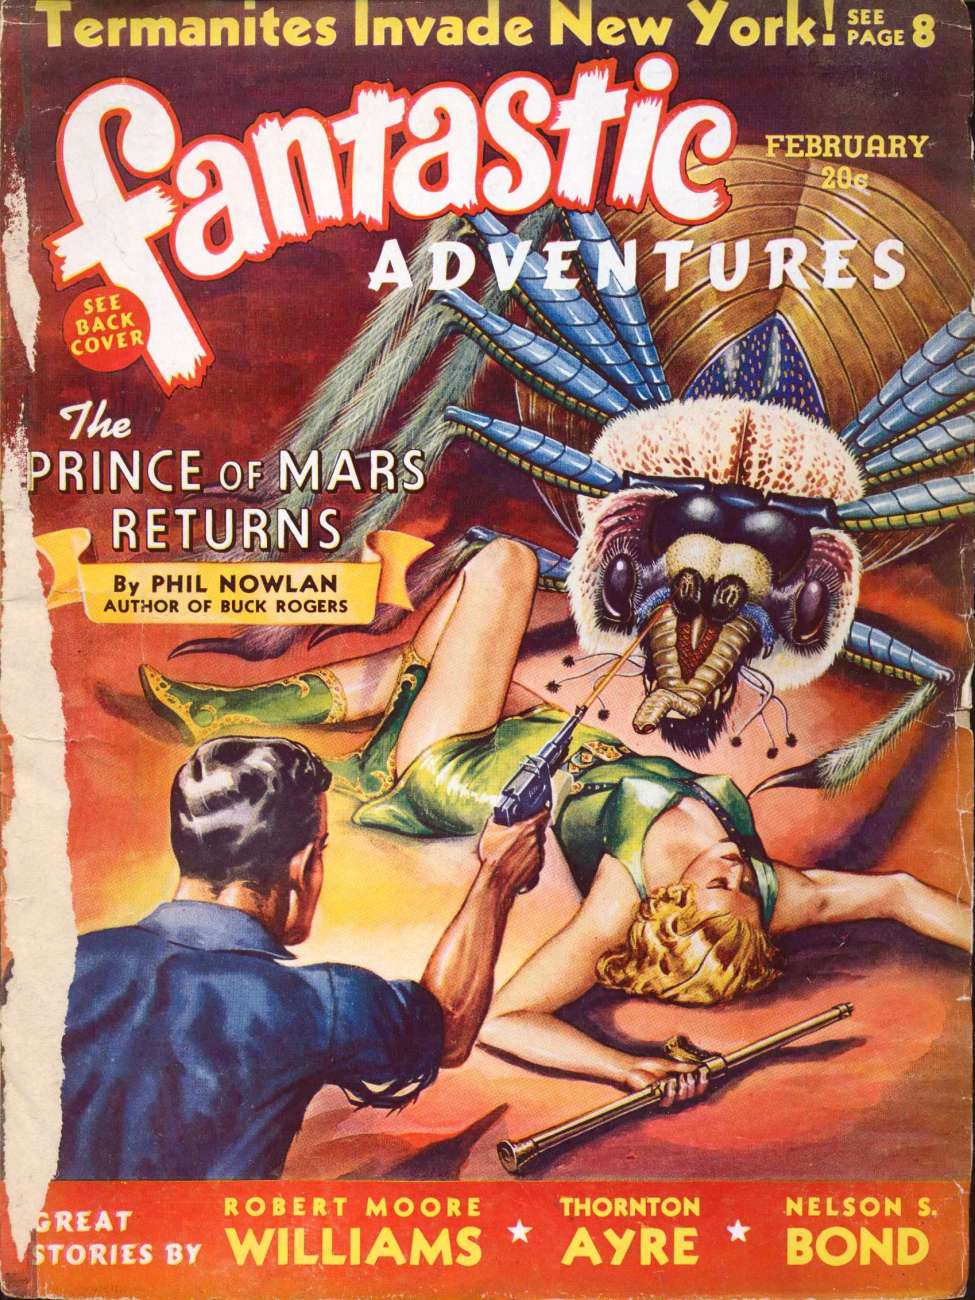 Book Cover For Fantastic Adventures v2 2 -The Prince of Mars Returns - Phil Nowlan p1